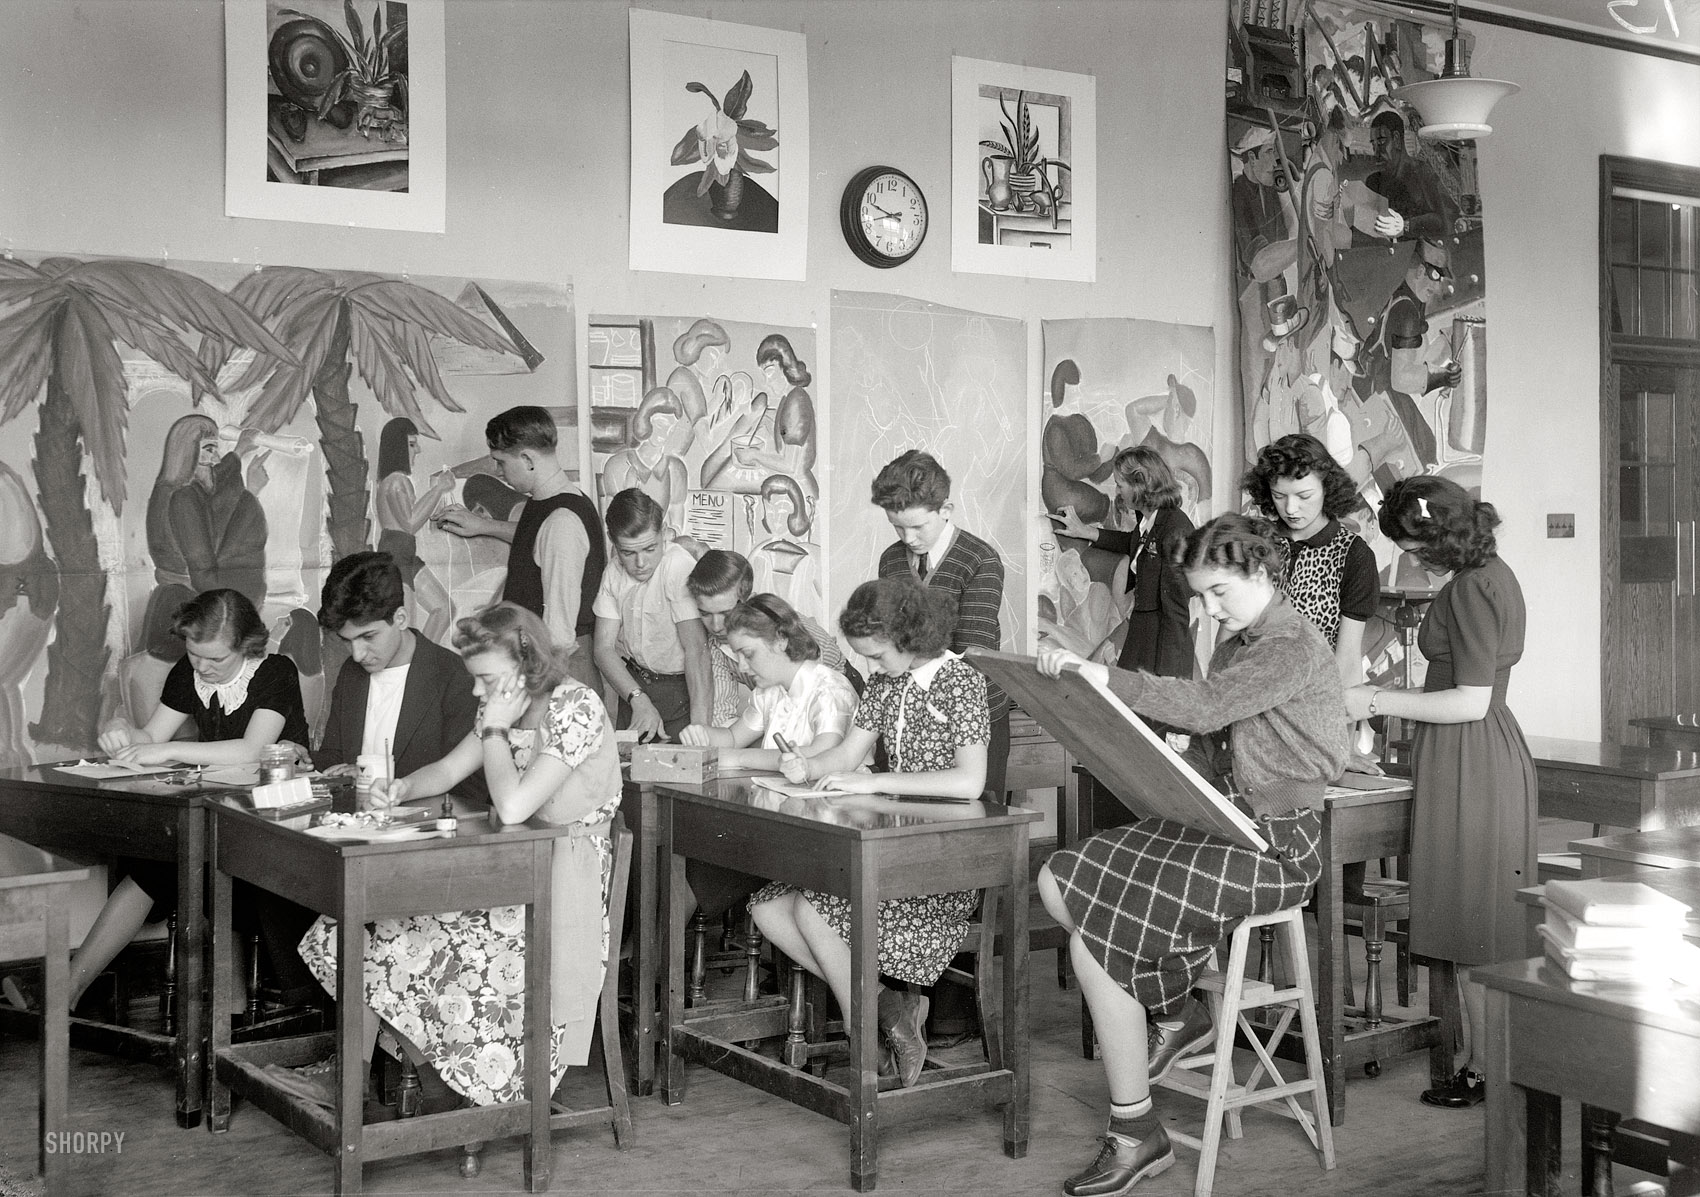 Washington, D.C., 1939. "Anacostia High School art class." National Photo Company Collection safety film negative. View full size.